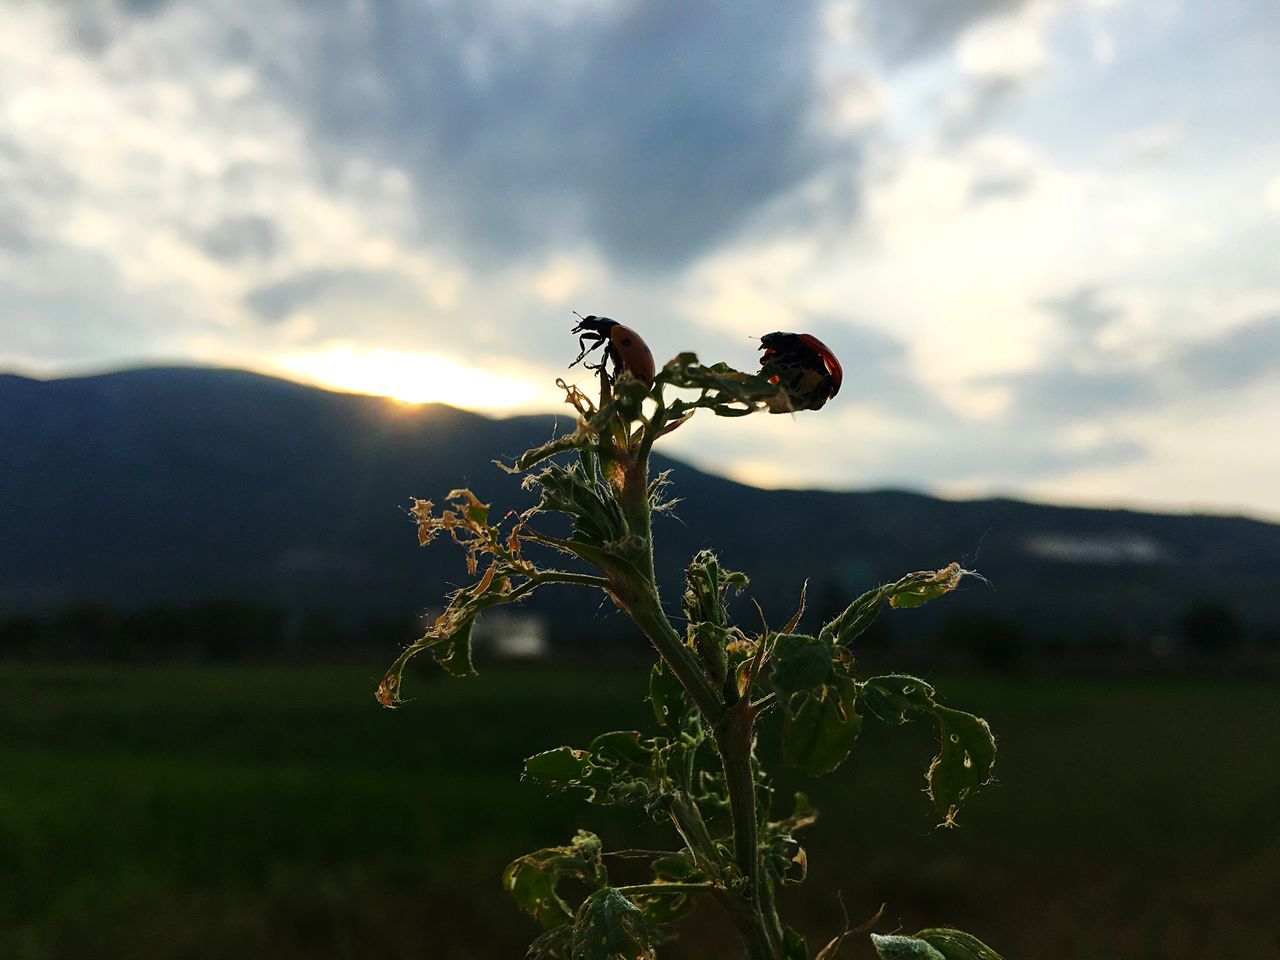 sky, growth, cloud - sky, sunset, plant, tranquility, beauty in nature, nature, silhouette, tranquil scene, landscape, field, mountain, scenics, cloudy, focus on foreground, cloud, stem, dusk, flower